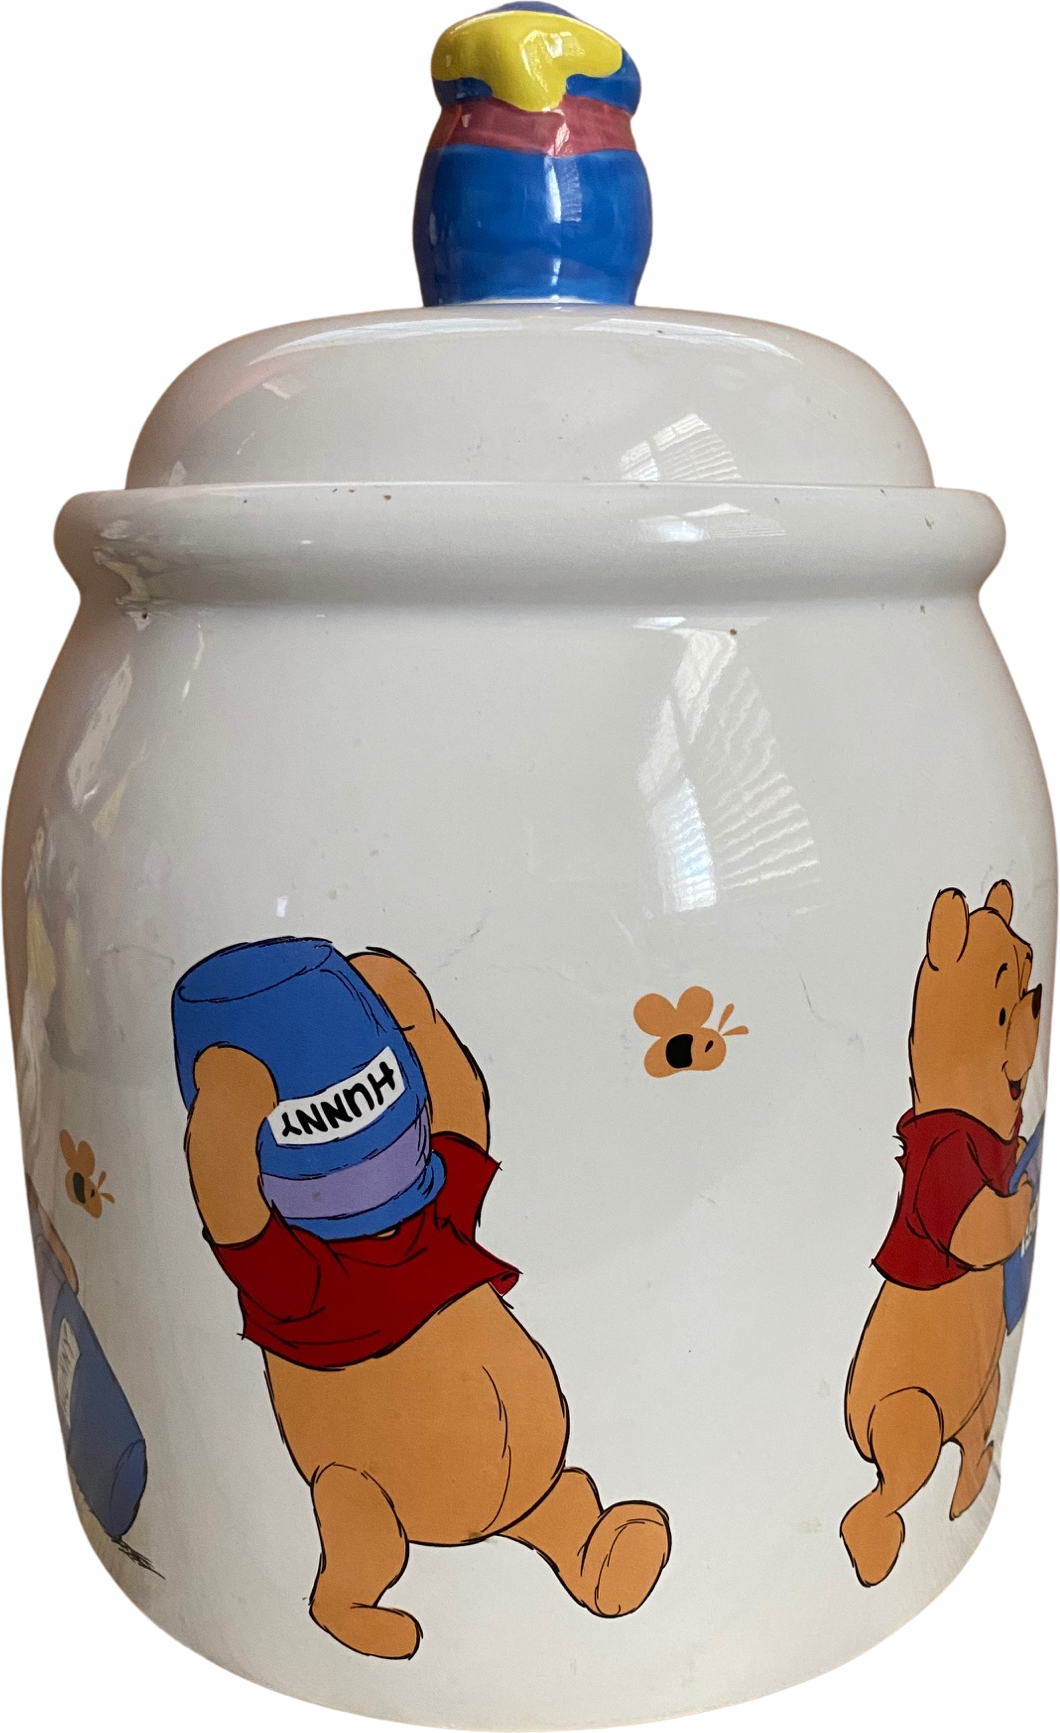 DISNEY WINNIE THE POOH CLEAR GLASS COOKIE JAR/CANISTER ANCHOR HOCKING 8.5